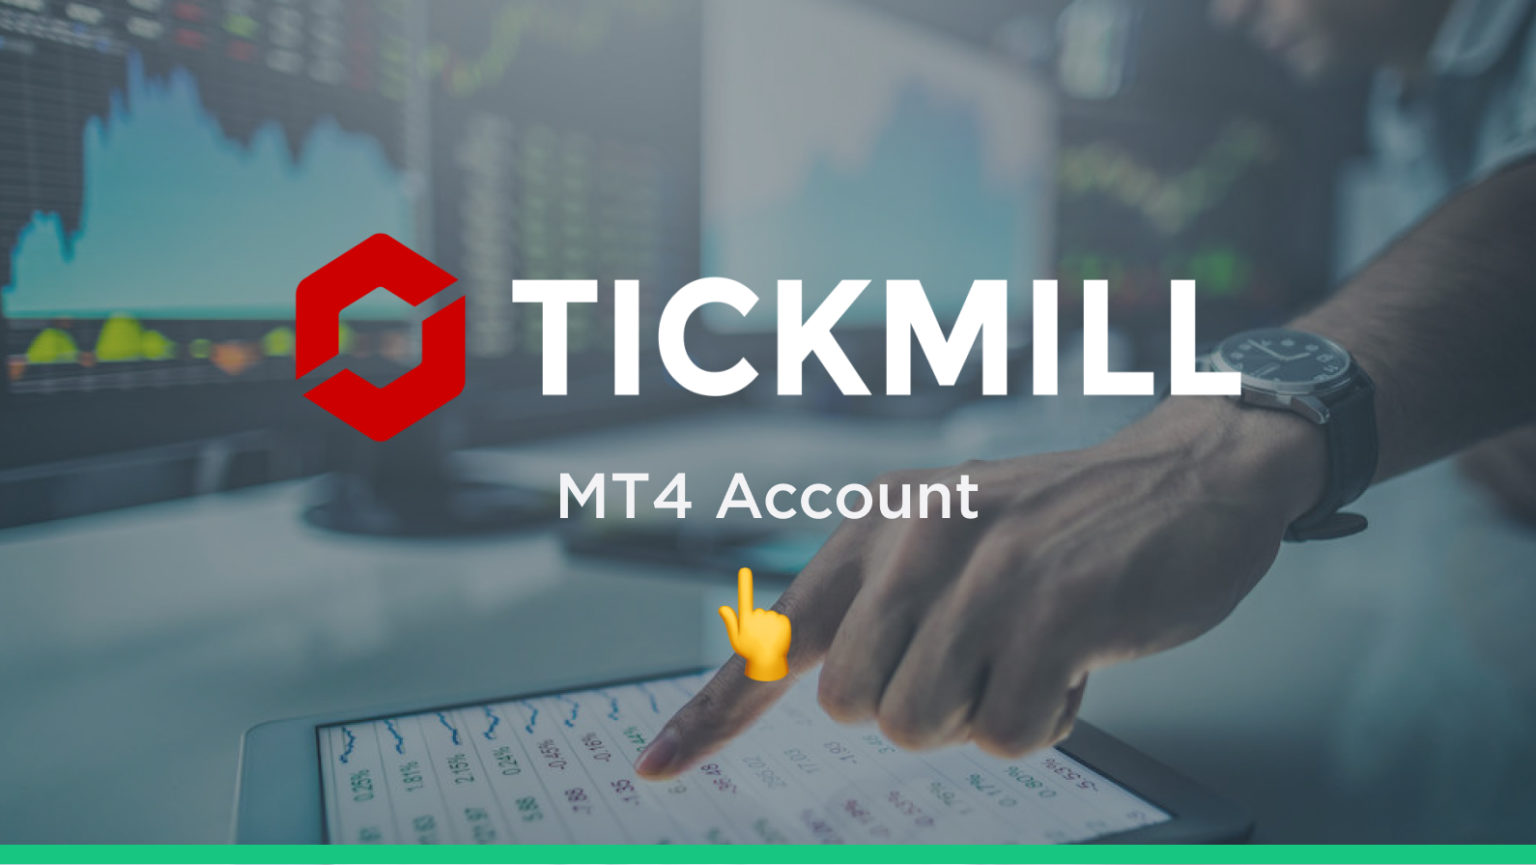 How to Open a Tickmill MT4 Account – A Step-by-step Guide